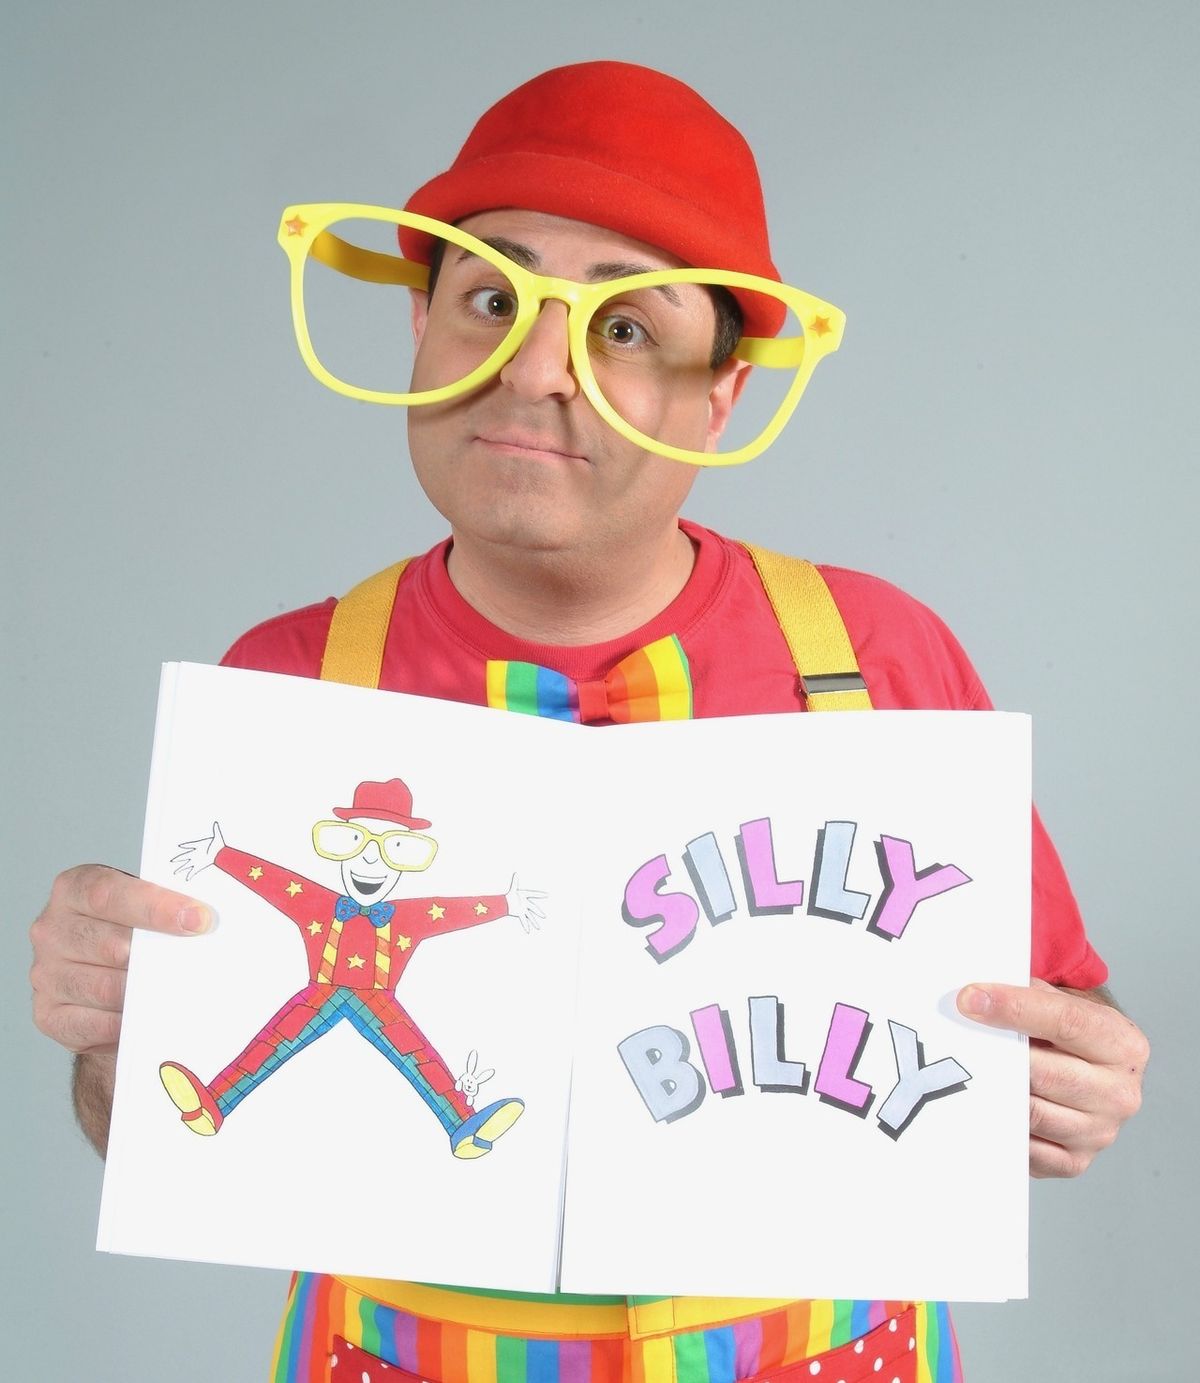 Silly Billy Magician